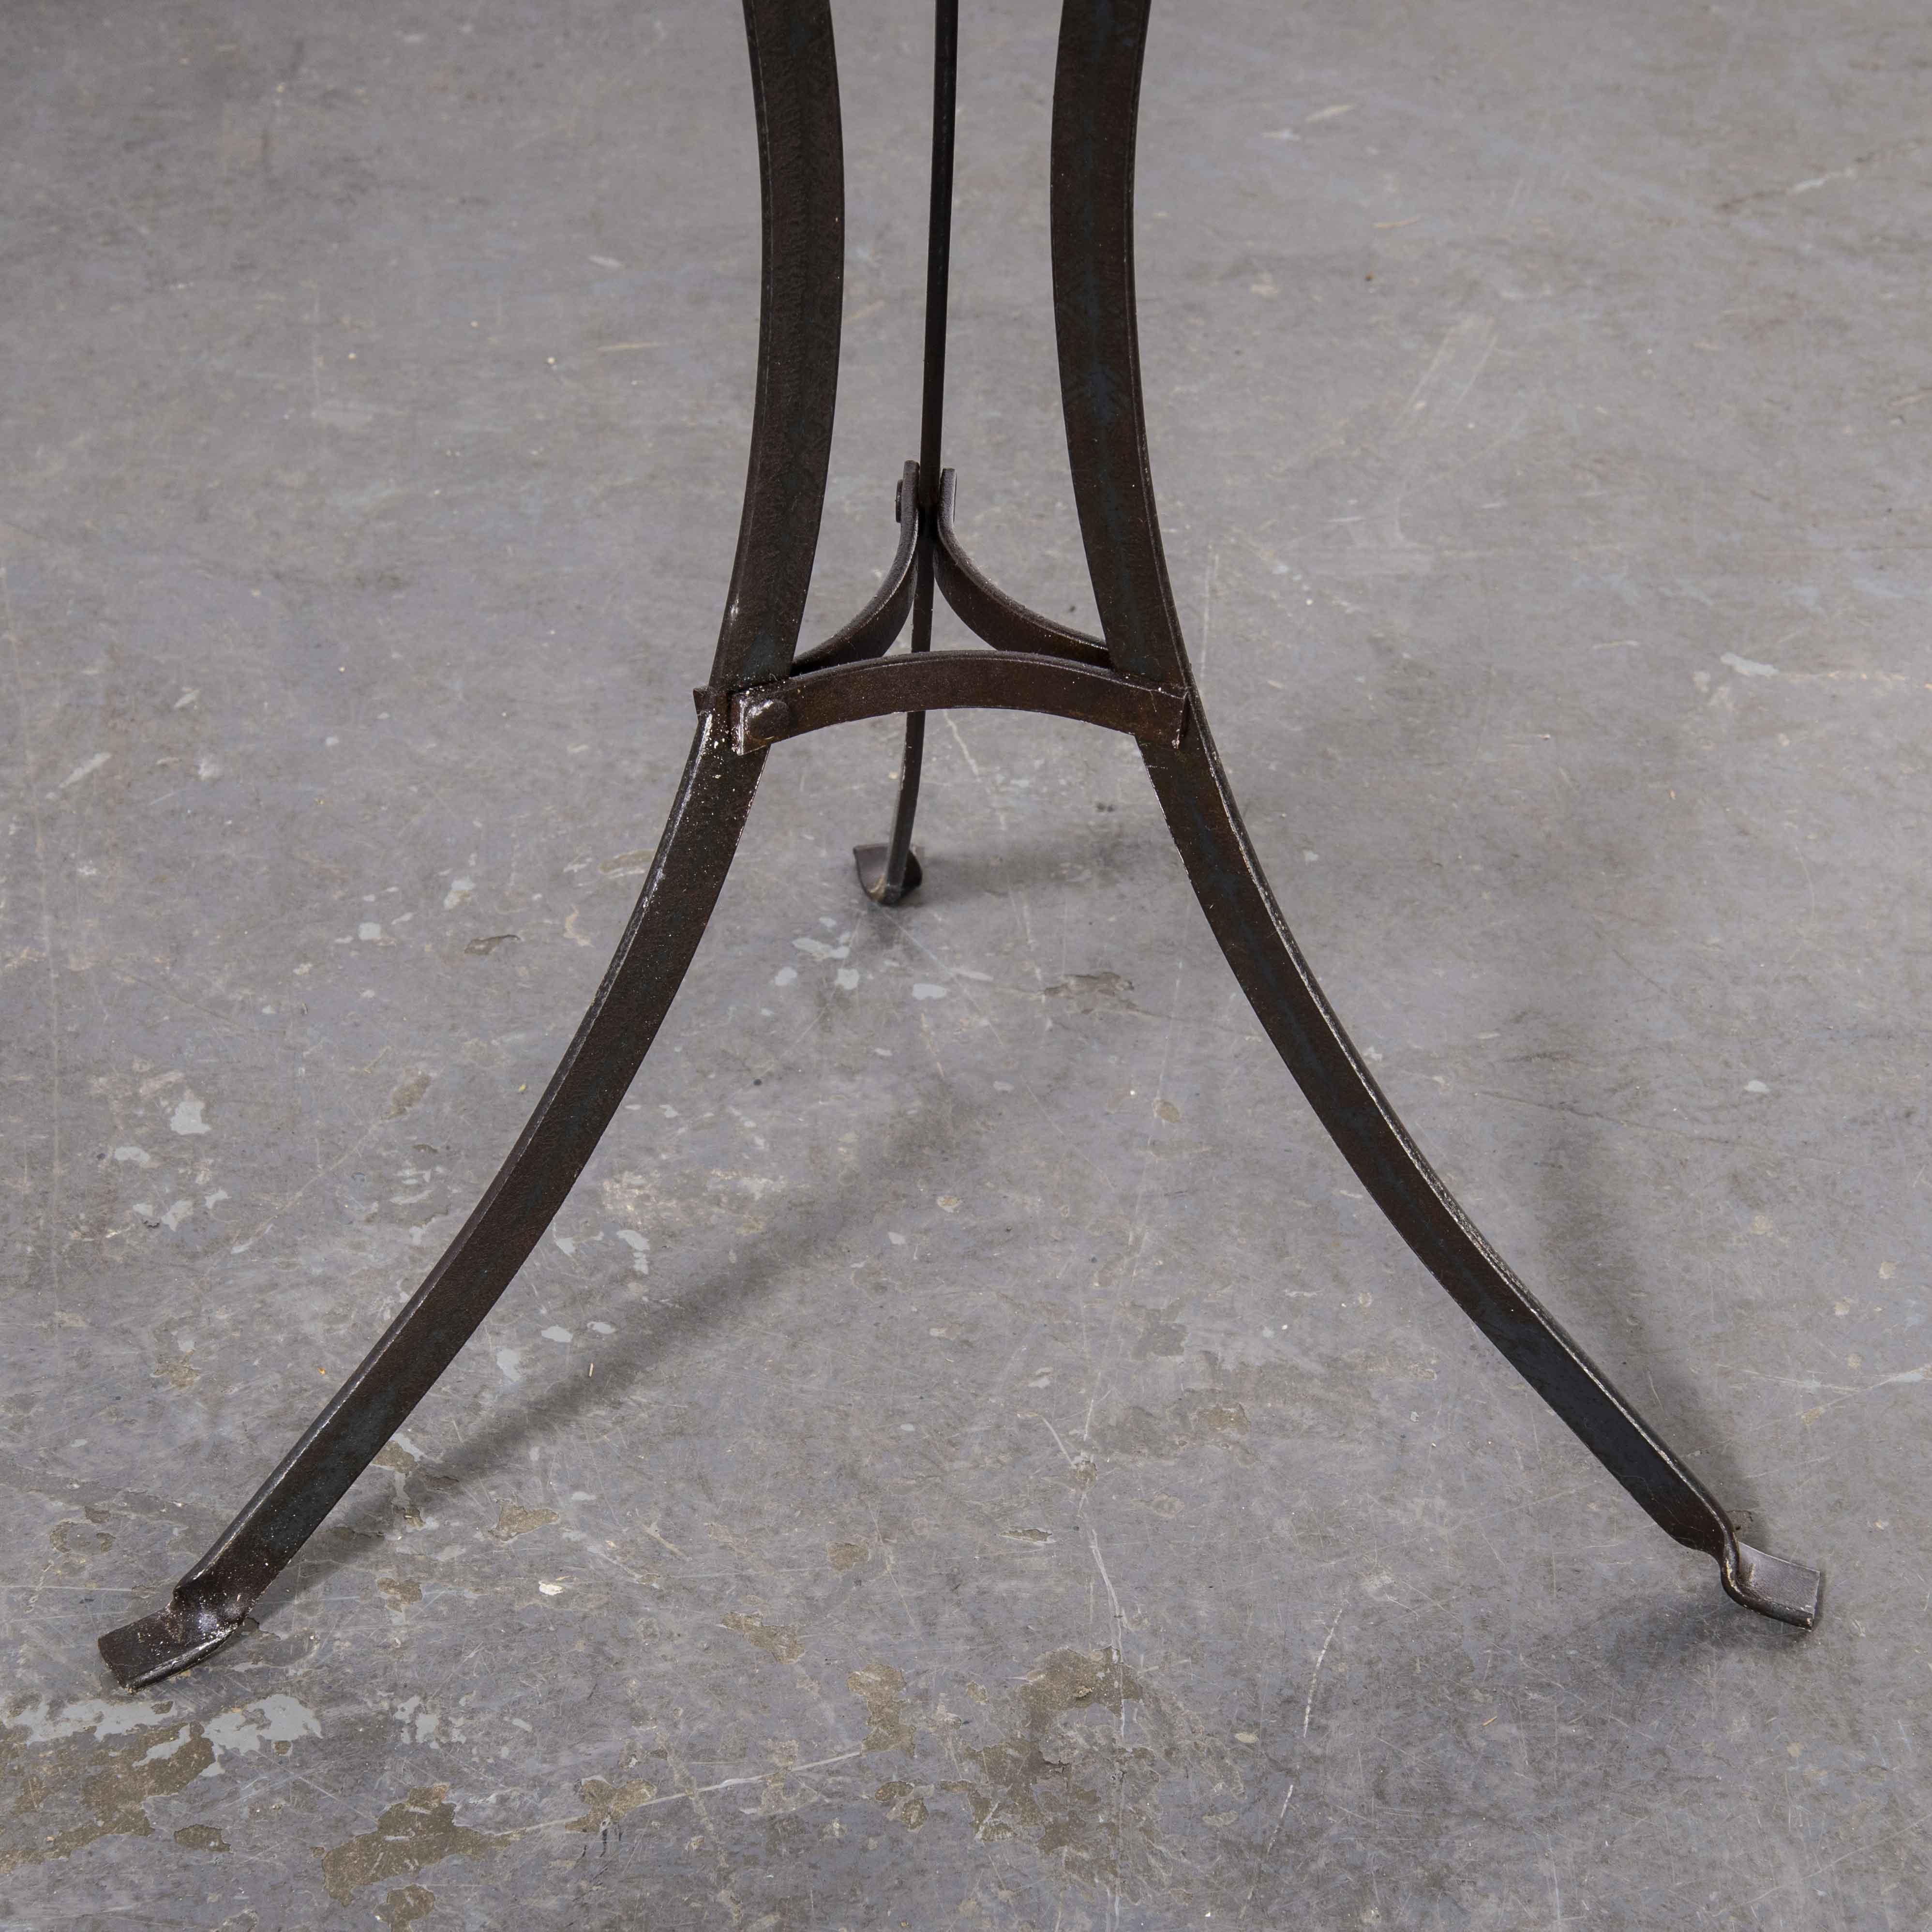 1950’s French small round metal gueridon table (Model 1346)
1950’s French small round metal gueridon table. Classic French round metal gueridon table. Solid flat bar tripod legs with two sets of lower central supports for the legs. Gently restored